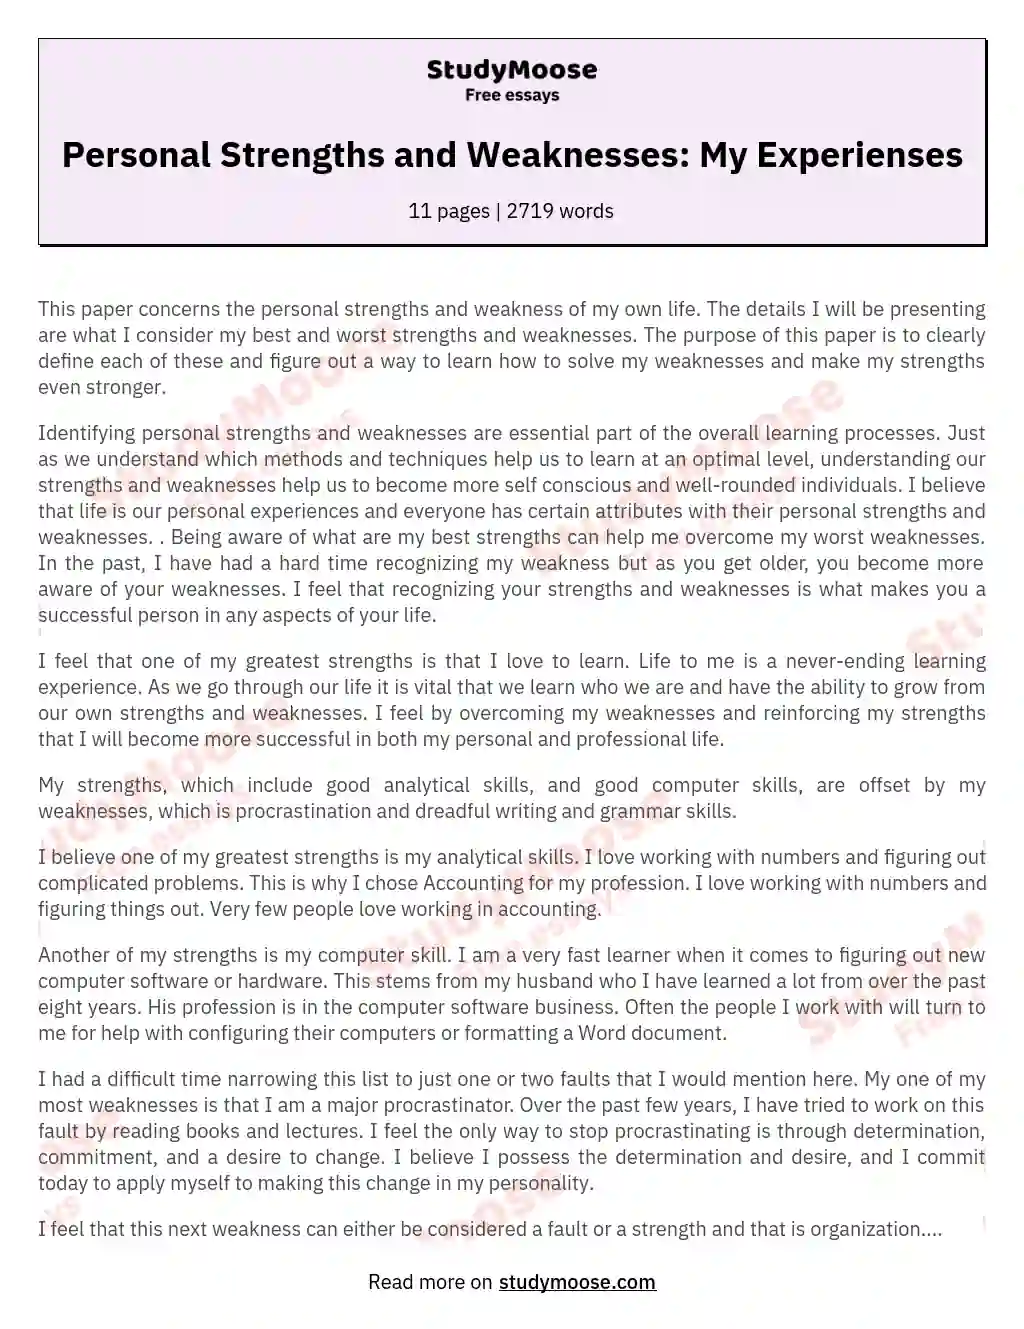 Personal Strengths and Weaknesses: My Experienses essay